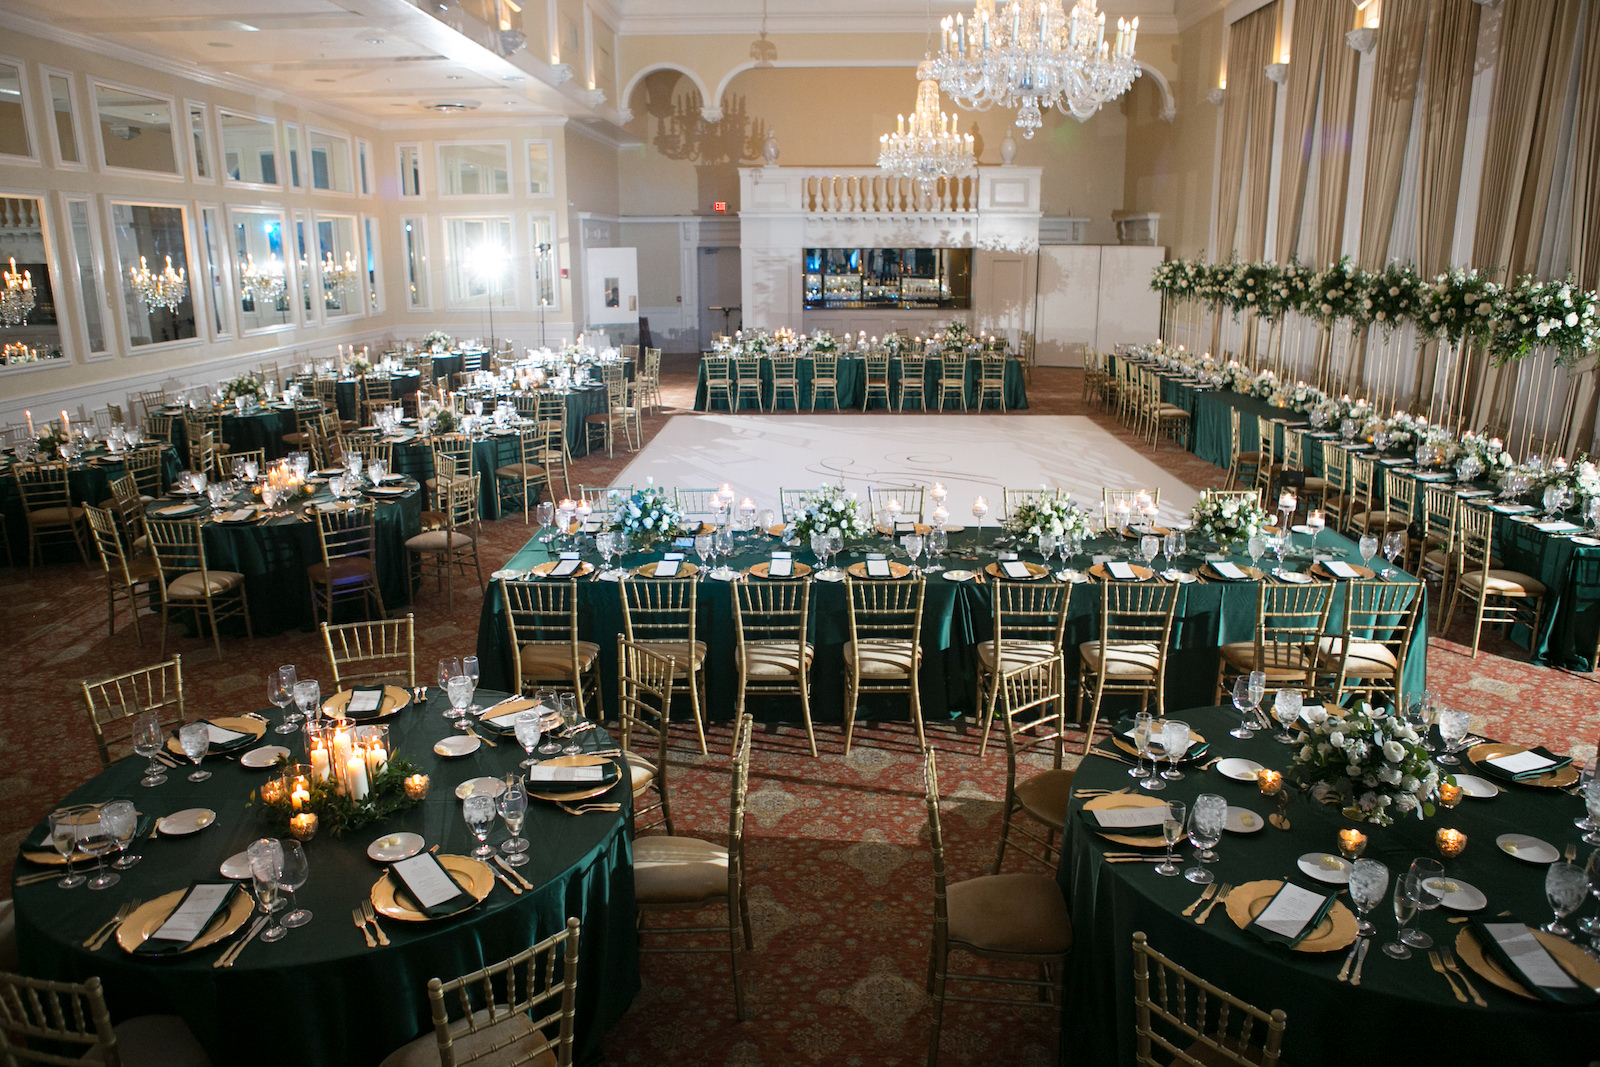 Green and Gold Christmas Wedding Decor, Long and Round Tables with Emerald Green Table Linens, Gold Chiavari Chairs, Goldd Chargers, White and Greenery Low and Tall Floral Centerpieces | Tampa Bay Wedding Photographer Carrie Wildes Photography | Wedding Rentals Kate Ryan Event Rentals | Over the Top Rental Linens | A Chair Affair Event Rentals | Tampa Wedding Venue Palma Ceia Golf & Country Club